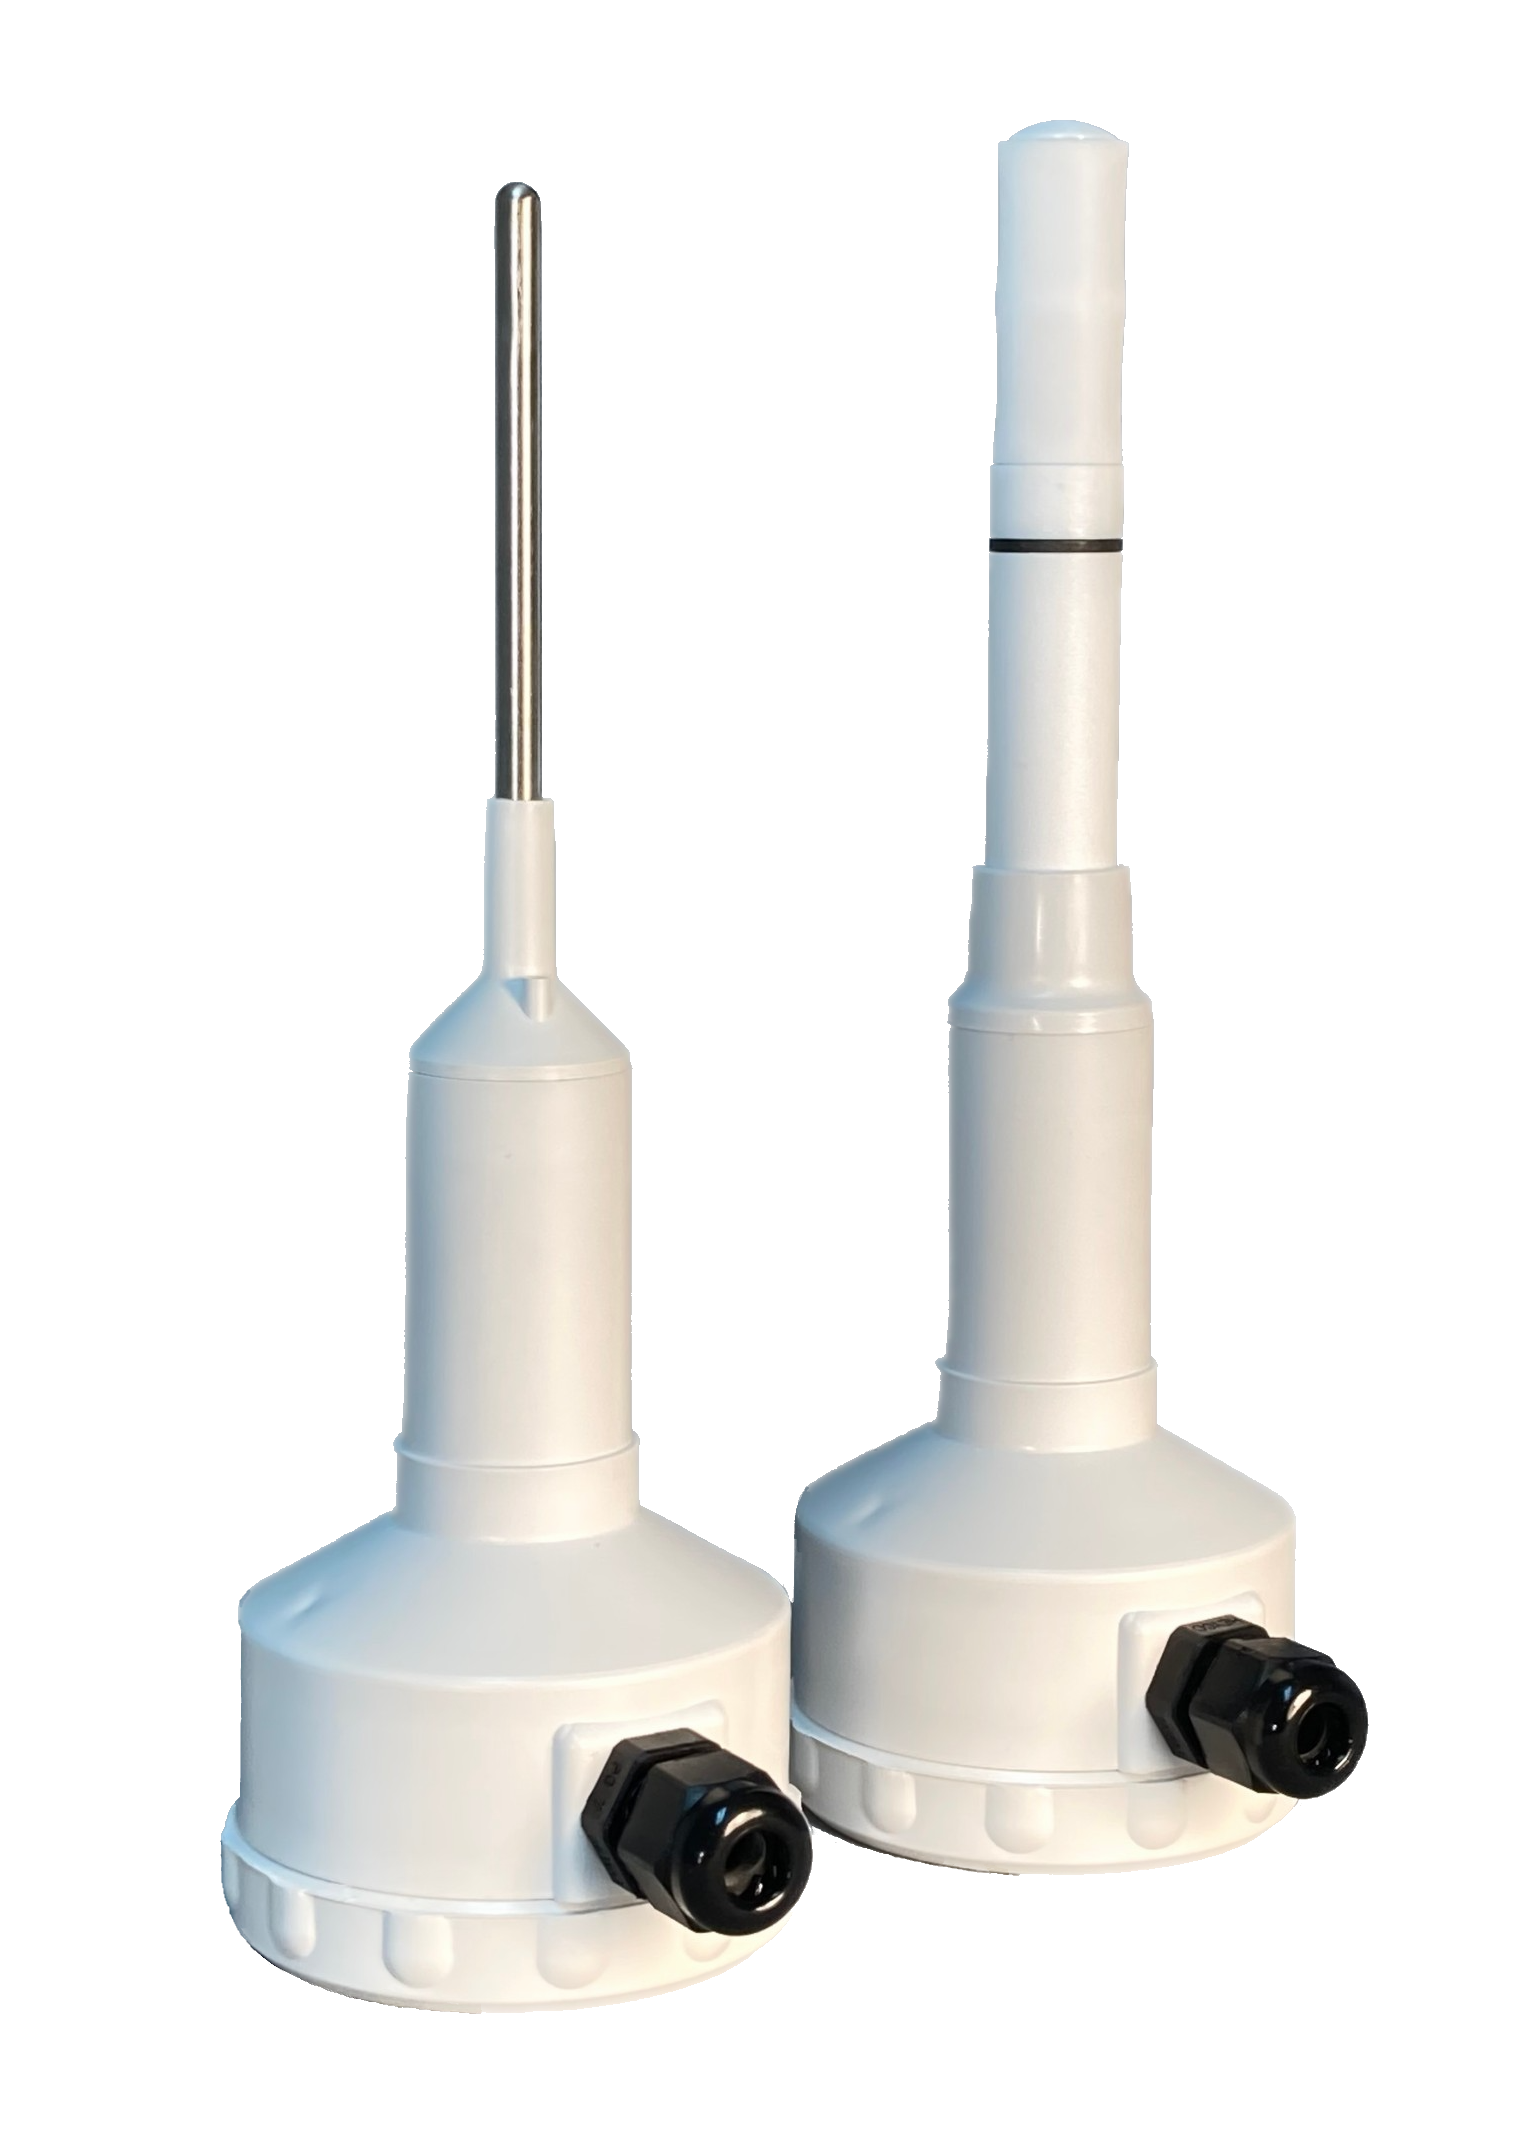 Humidity transmitters for humidity and temperature